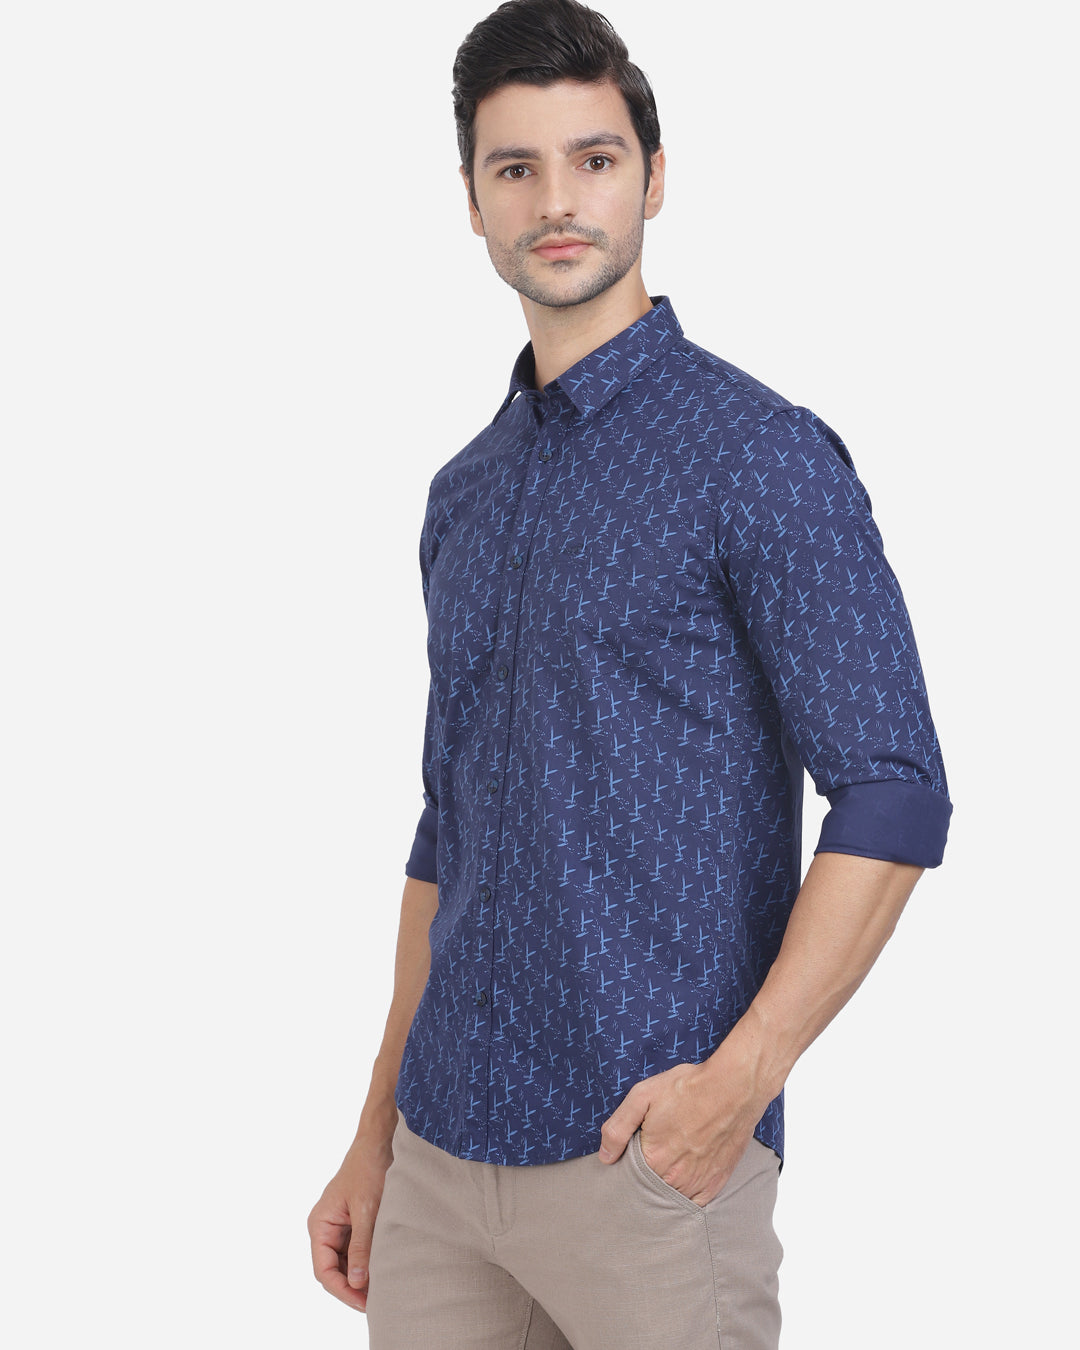 Crocodile Casual Full Sleeve Slim Fit Printed Navy with Collar Shirt